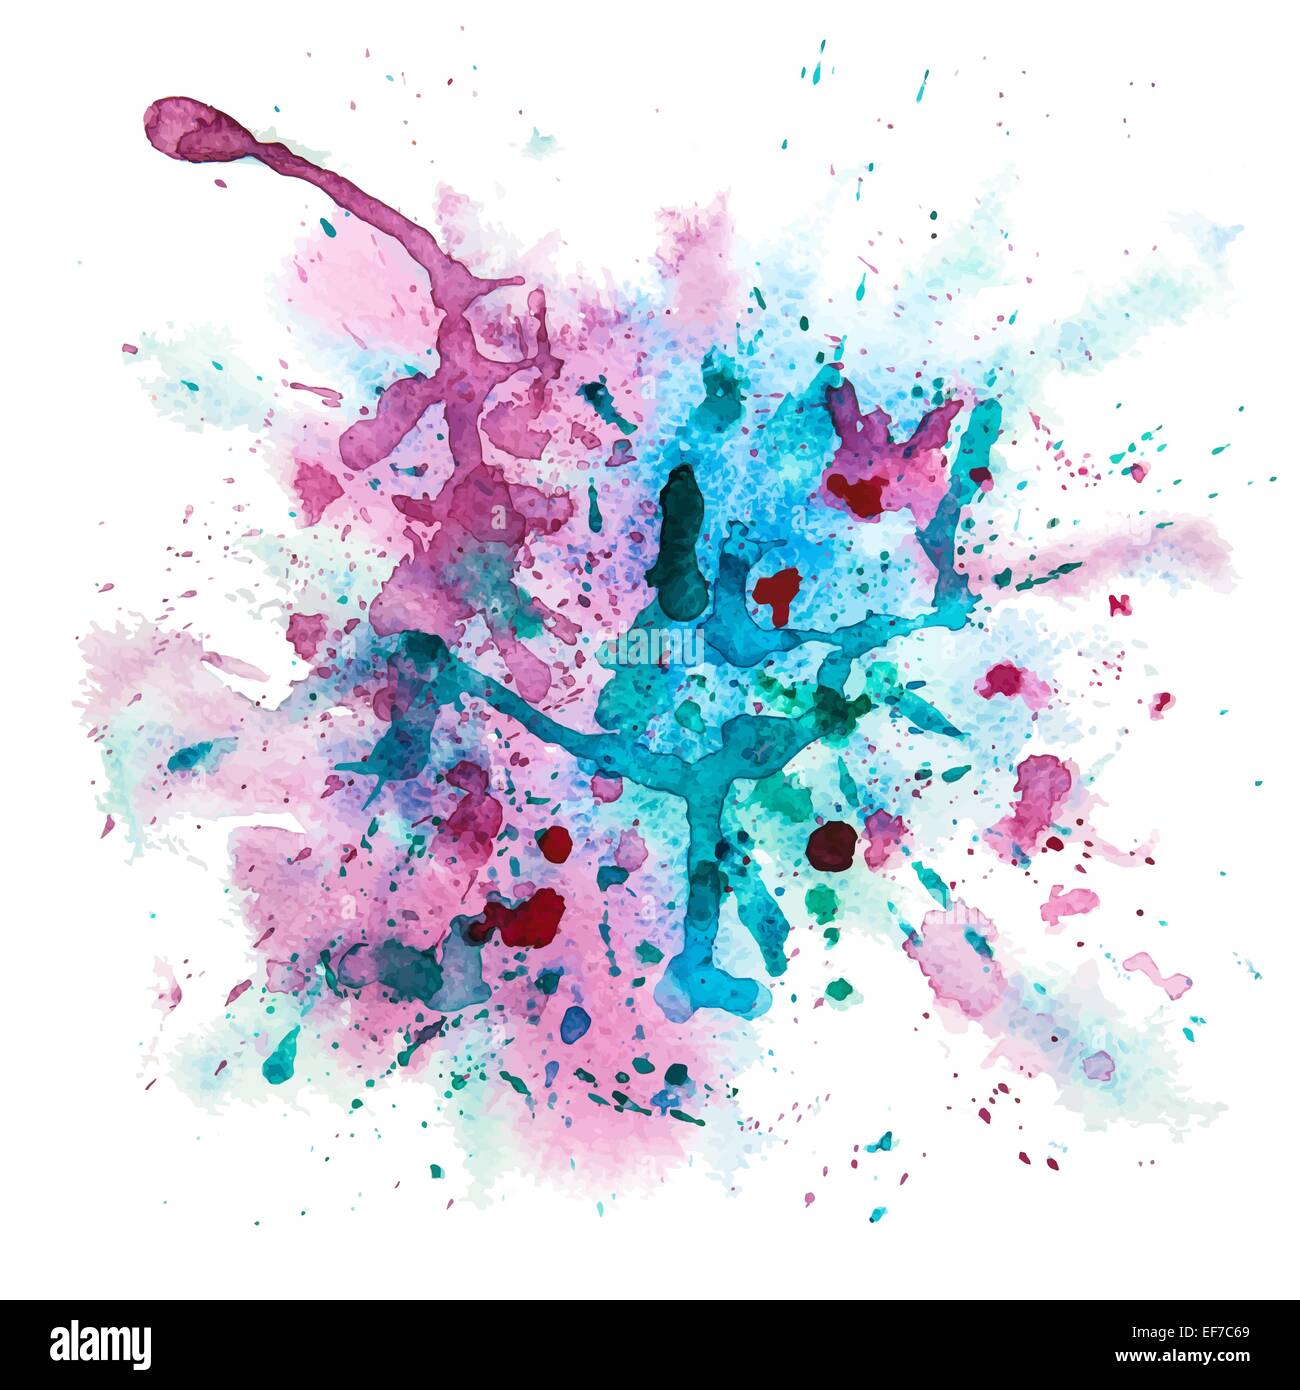 Vector Multicolored Grunge Background With Watercolor Splash Stock Vector